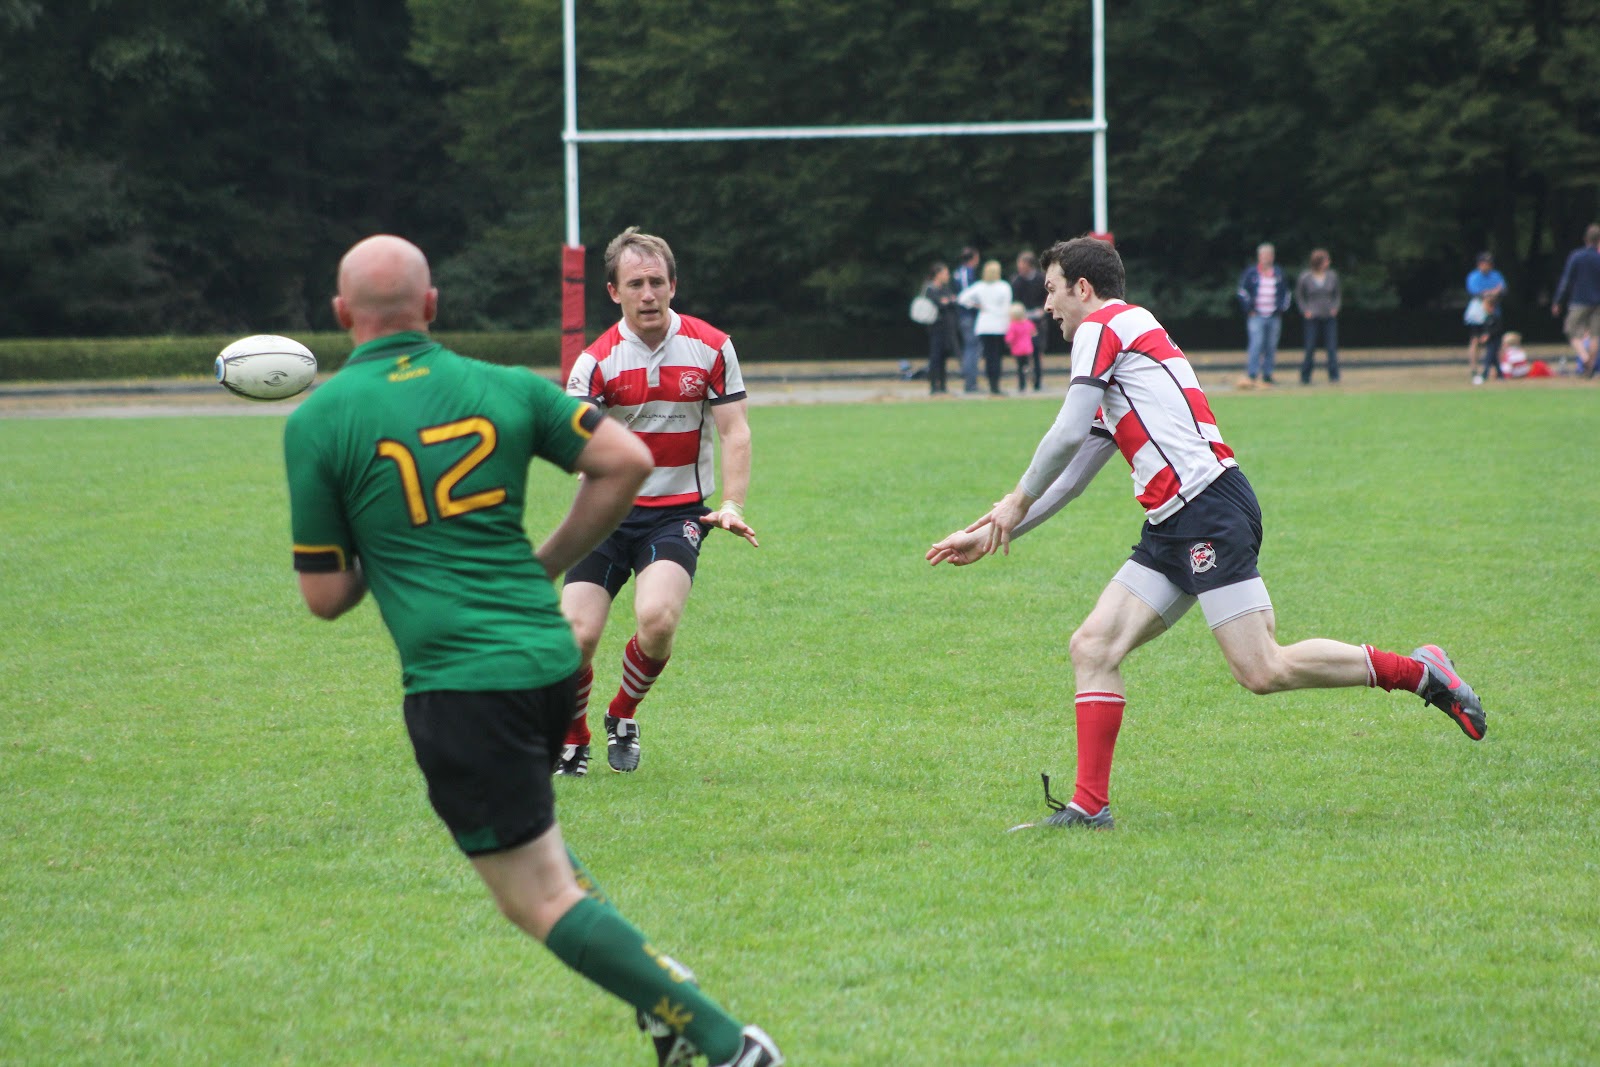 rugby miss pass